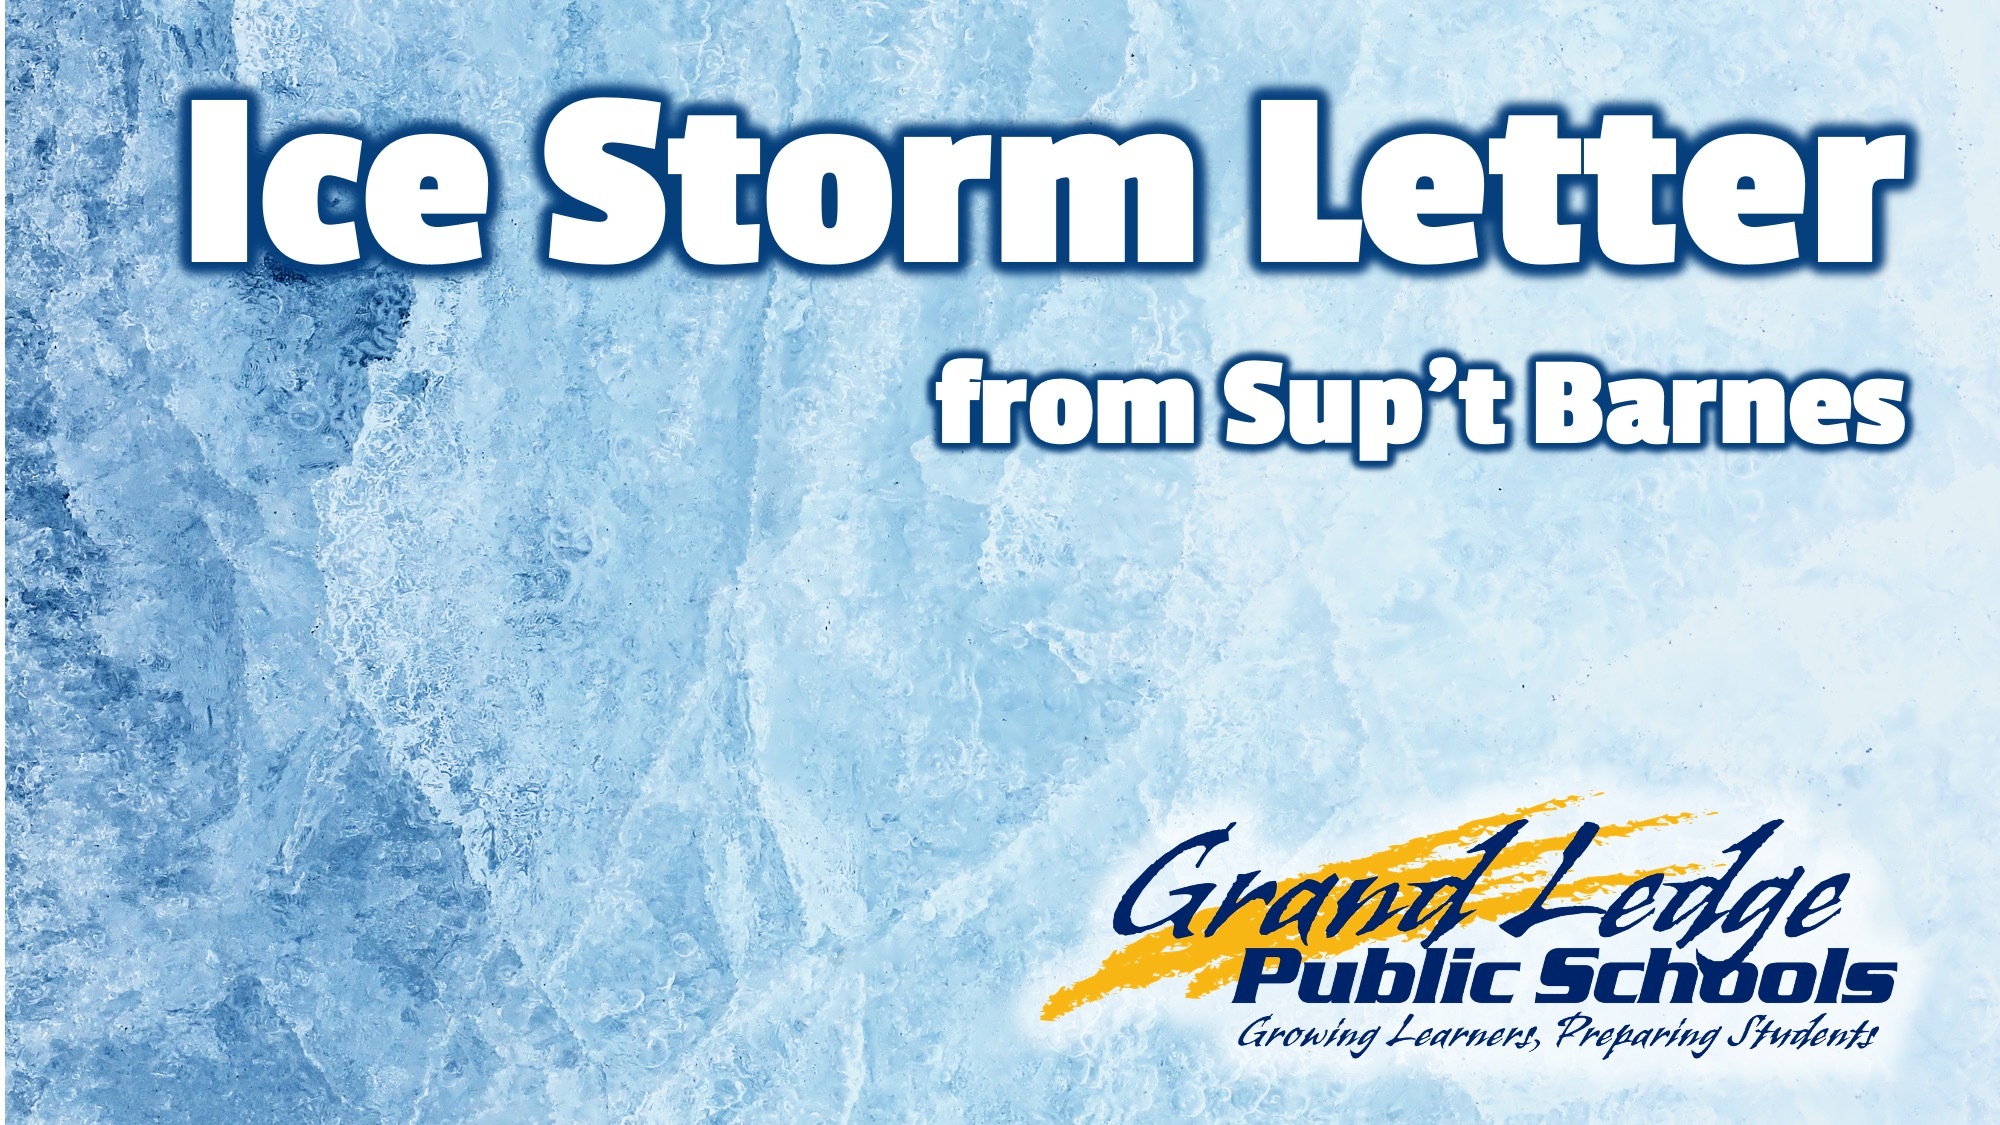 Ice Storm Letter from Superintendent Bill Barnes